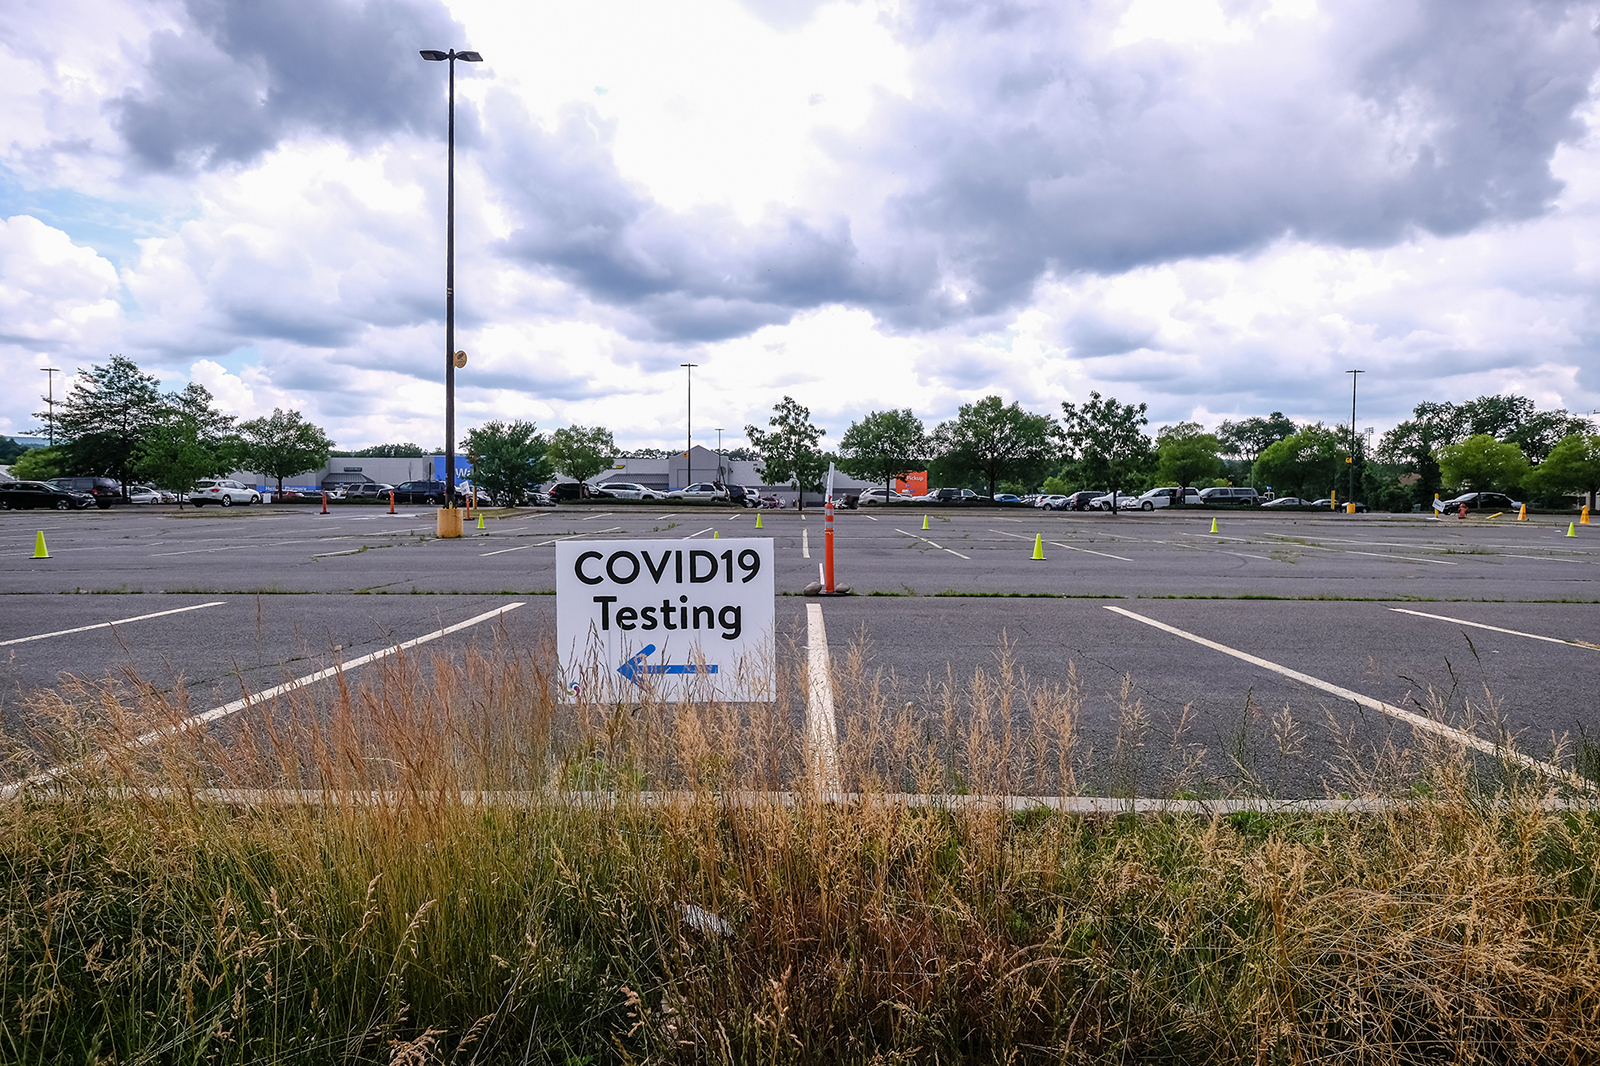 An empty Covid19 testing center in a Milford, Pennsylvania Walmart parking lot on June 19. 